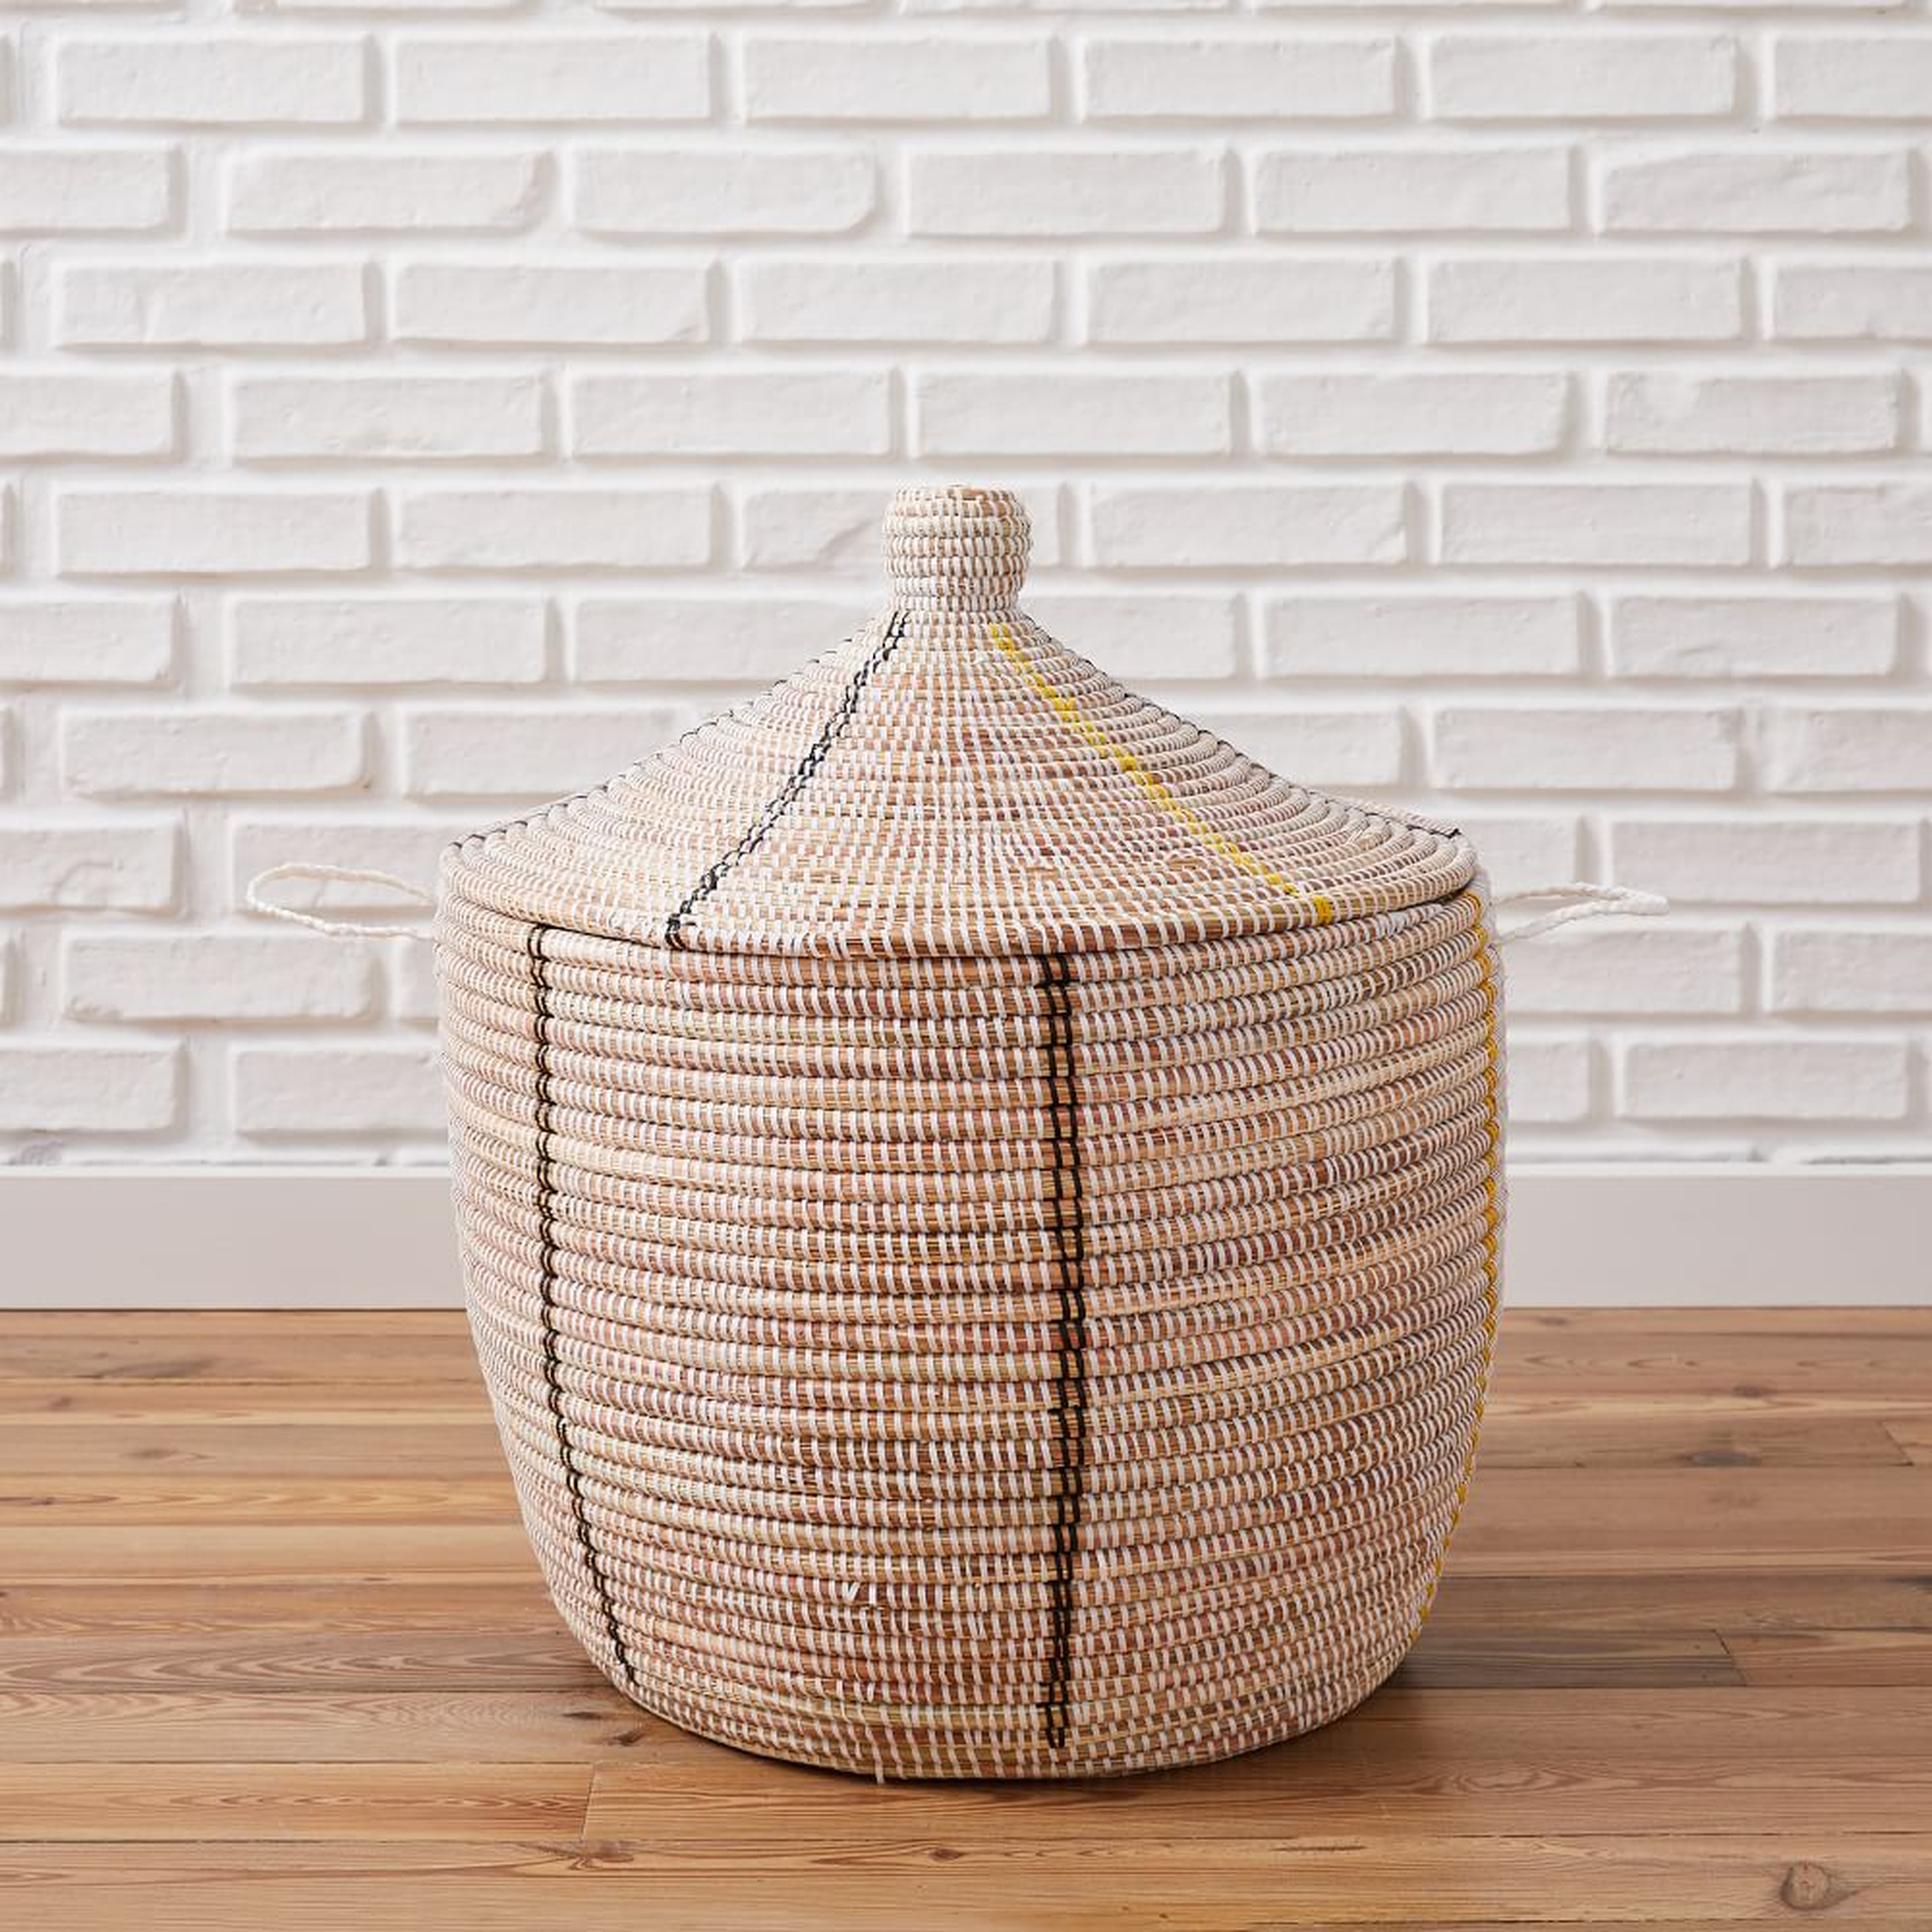 Mbare Graphic Basket, White, Oversized - West Elm